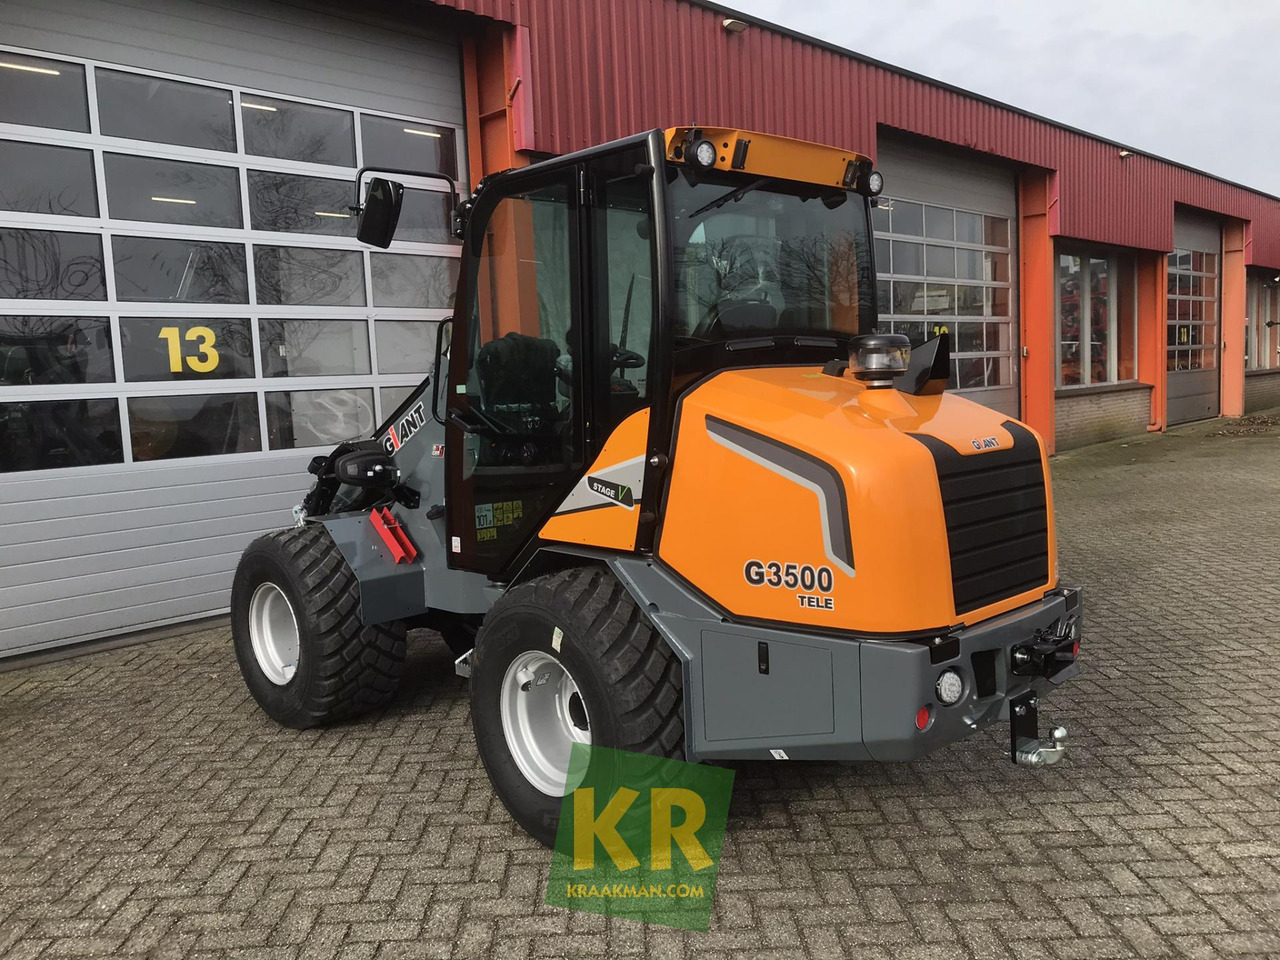 Compact loader G3500 Tele Giant